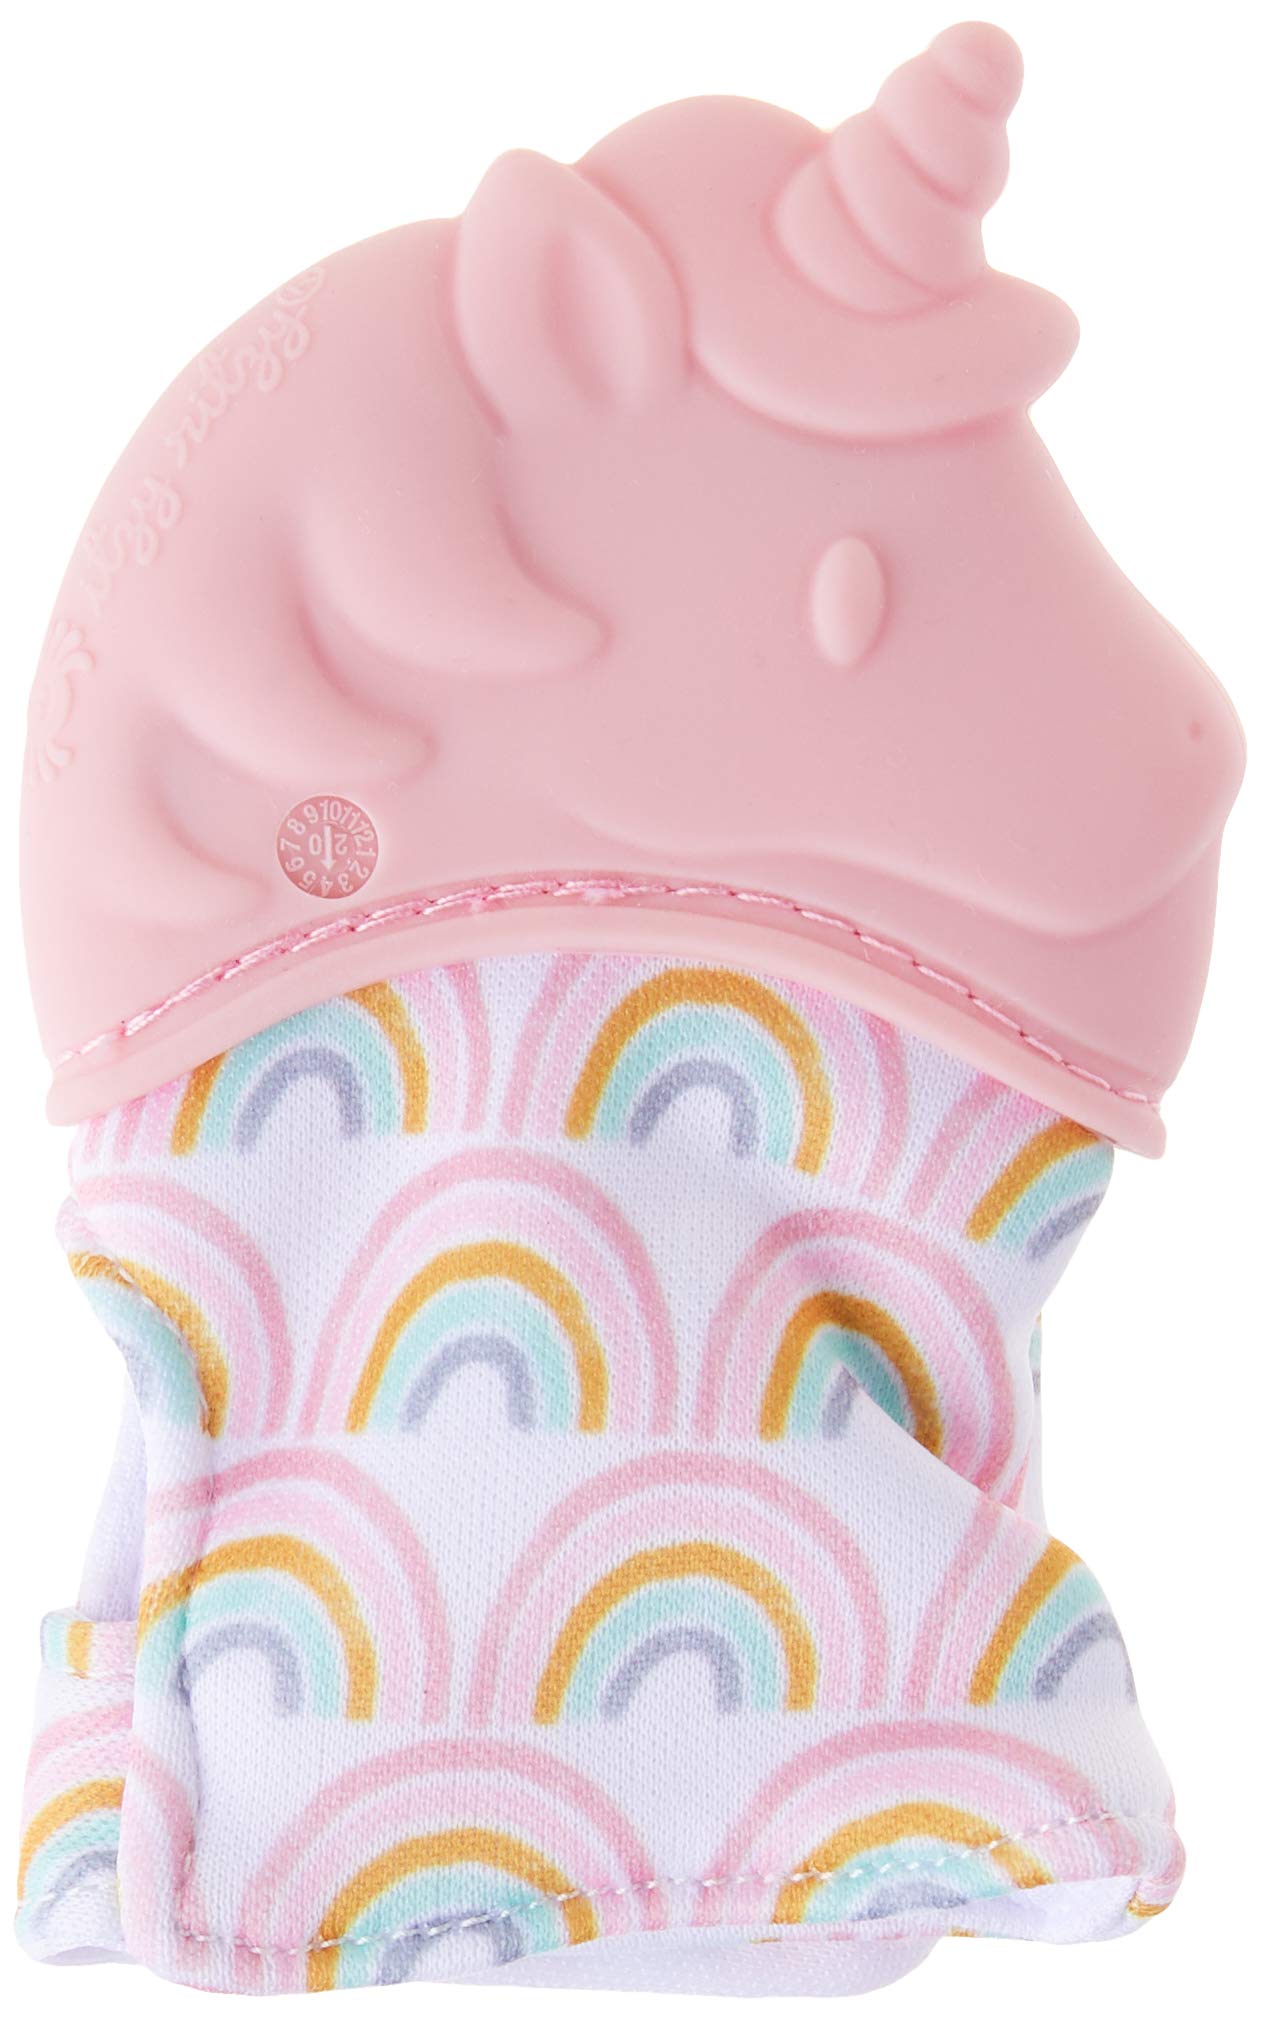 Itzy Ritzy Silicone Teething Mitt - Soothing Infant Teething Mitten with Adjustable Strap, Crinkle Sound & Textured Silicone to Soothe Sore & Swollen Gums, Blush Unicorn